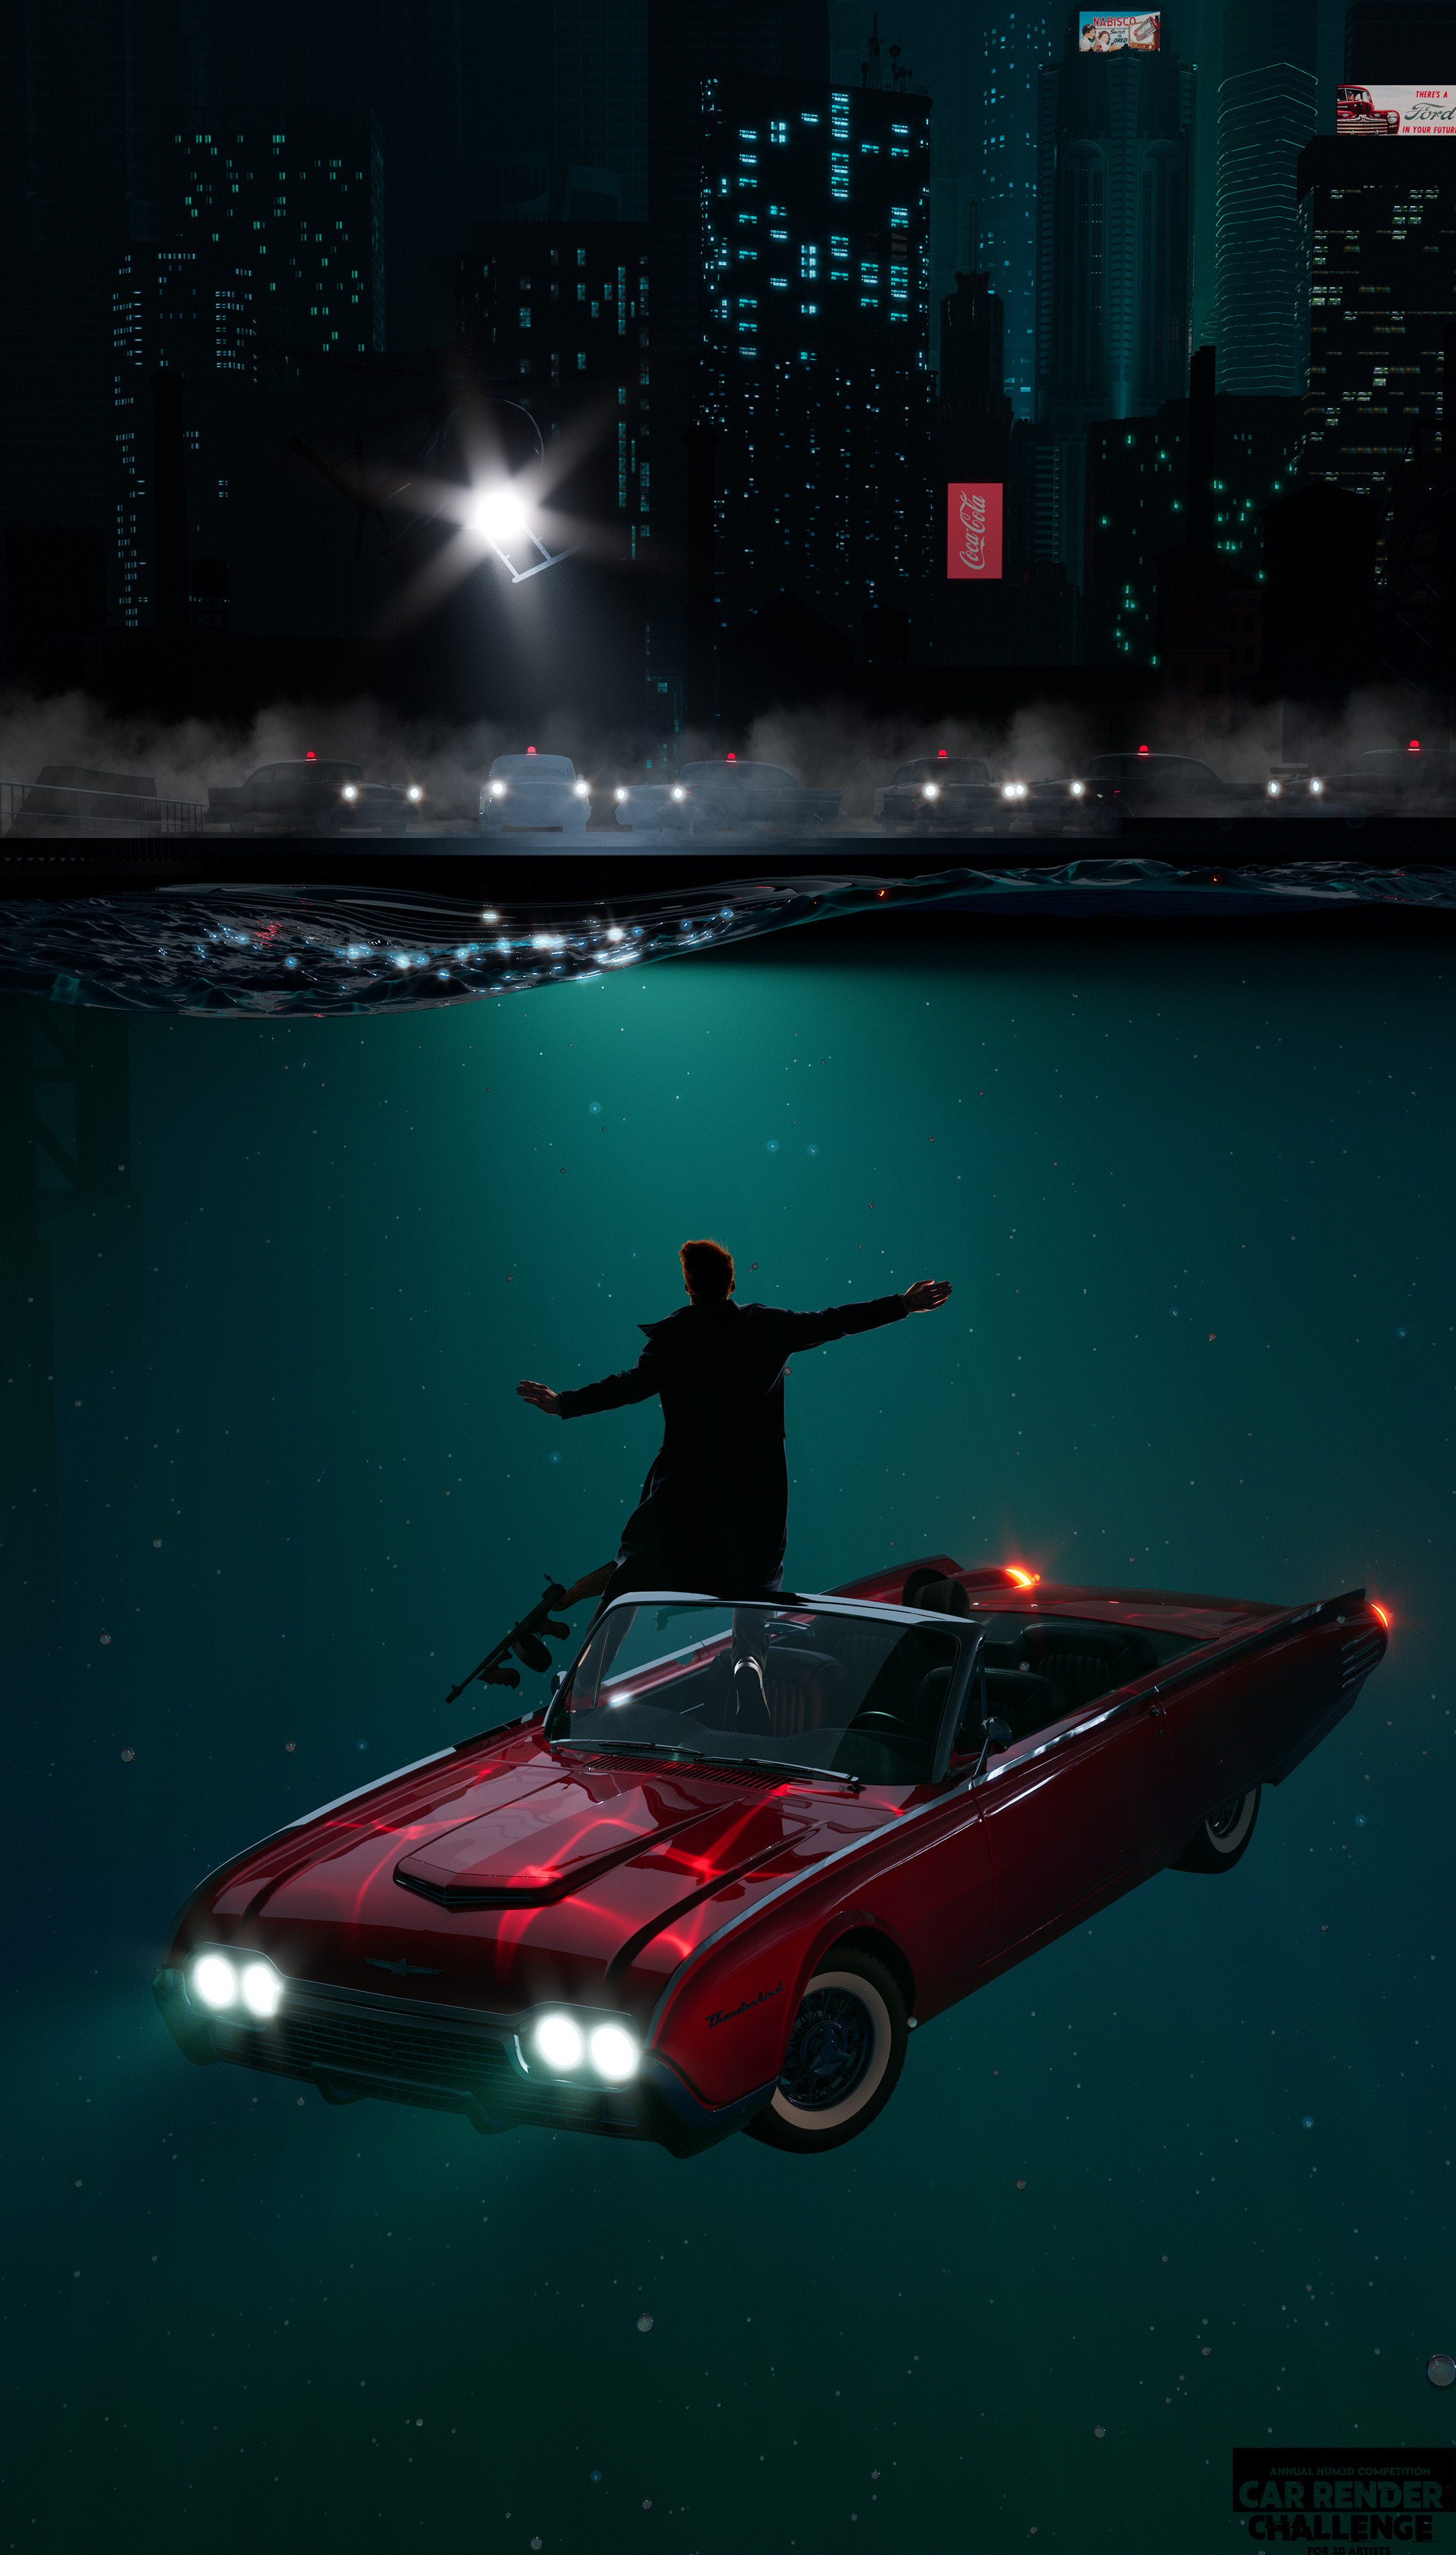 Car Render Challenge 2021 - The shape of water